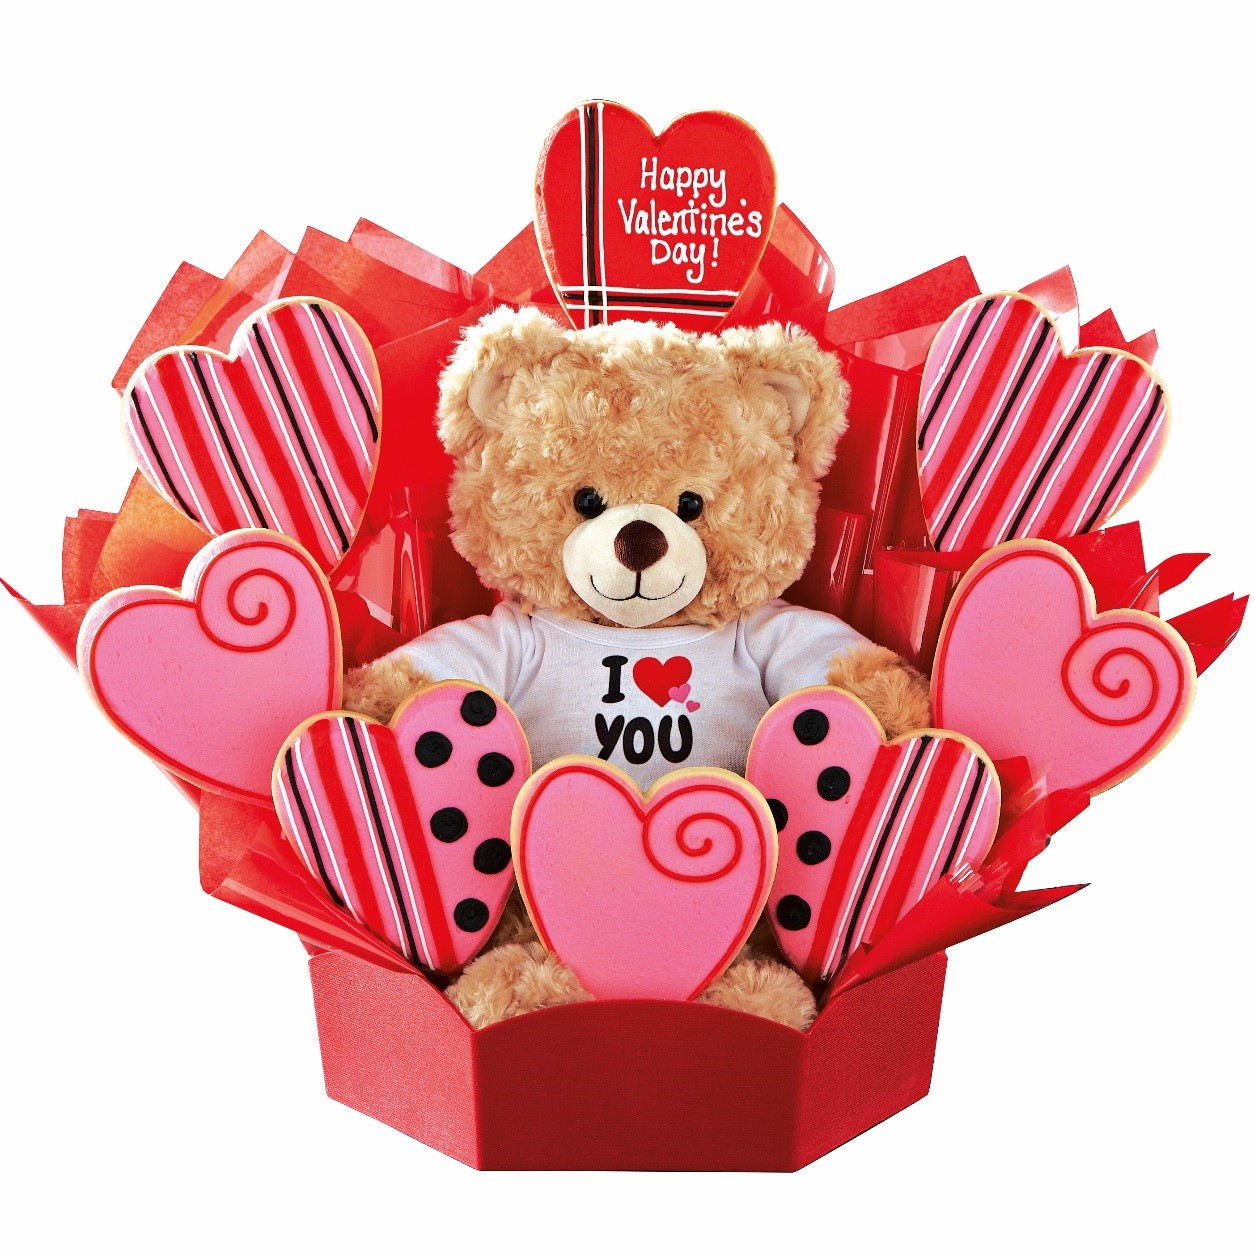 Valentines Day Cookies Delivery
 Build A Bear and Cookies By Design Valentine s Day Prize